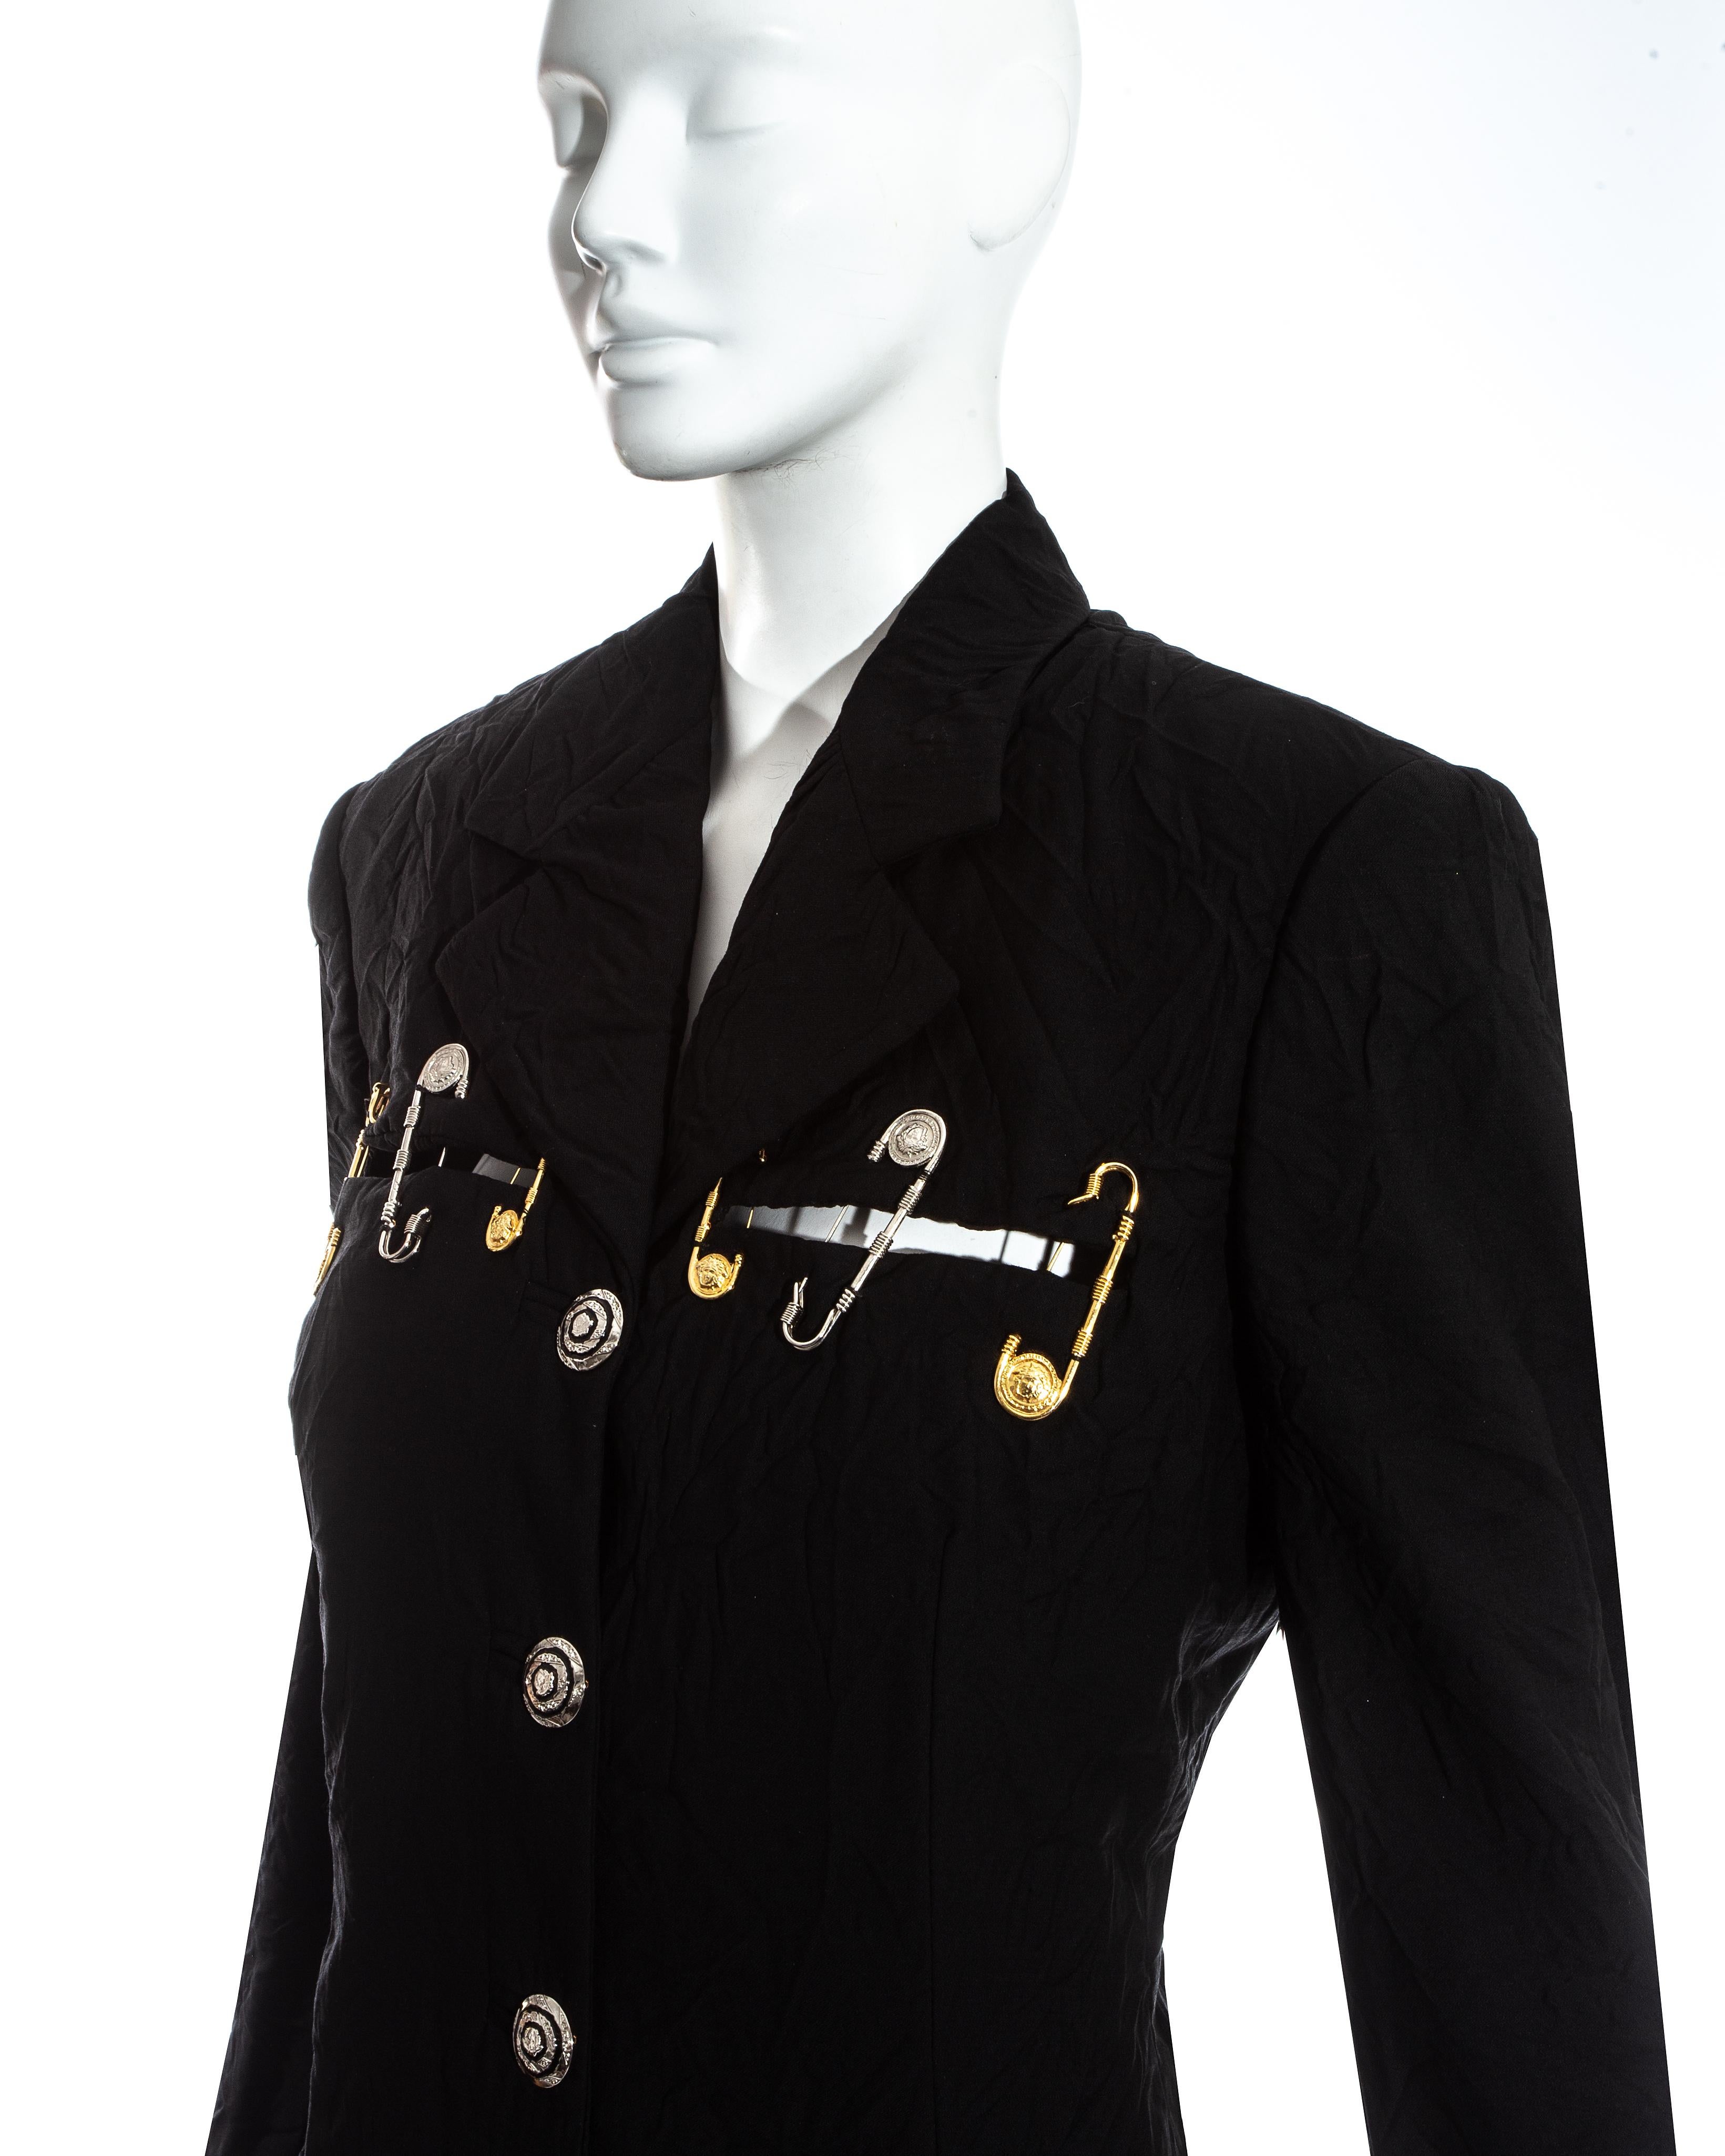 Gianni Versace black crinkled safety pin skirt suit, ss 1994 For Sale 3